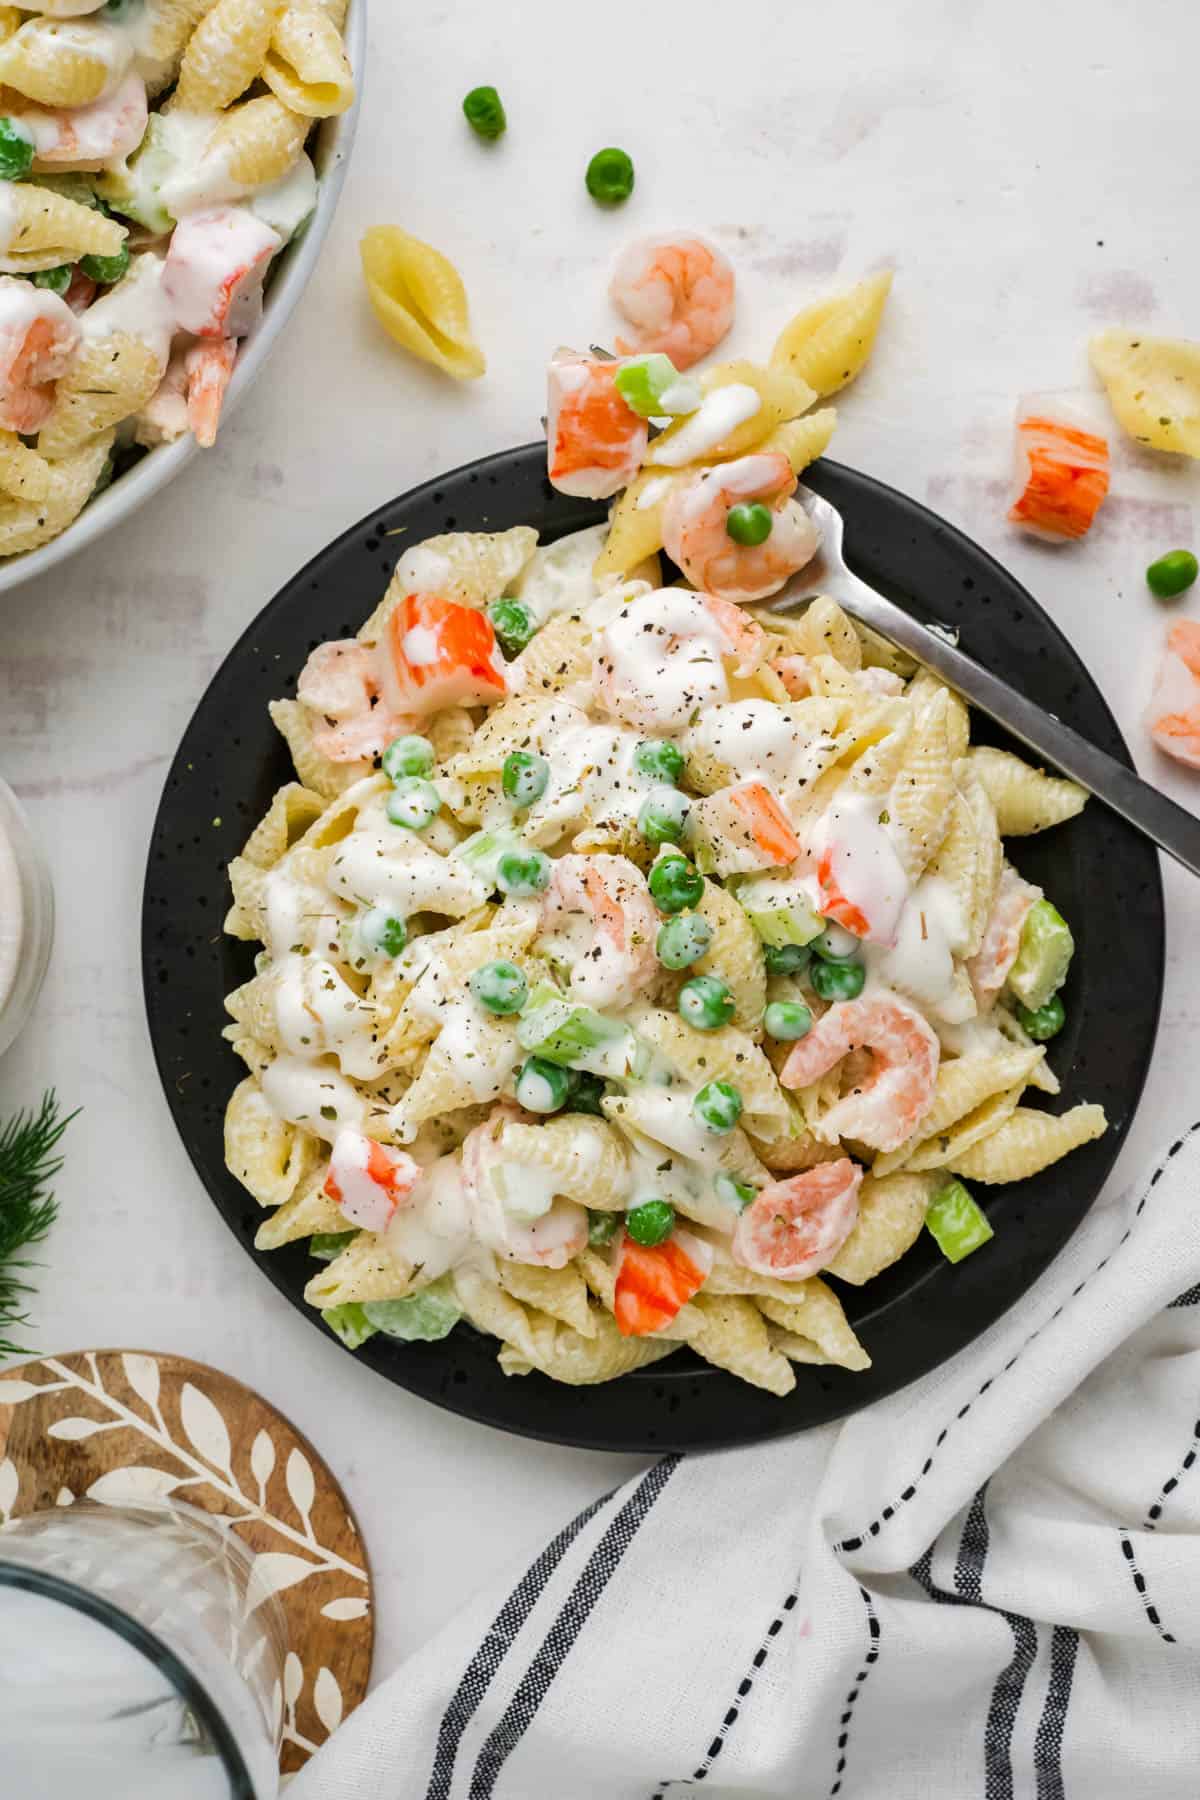 A plate of seafood pasta salad.